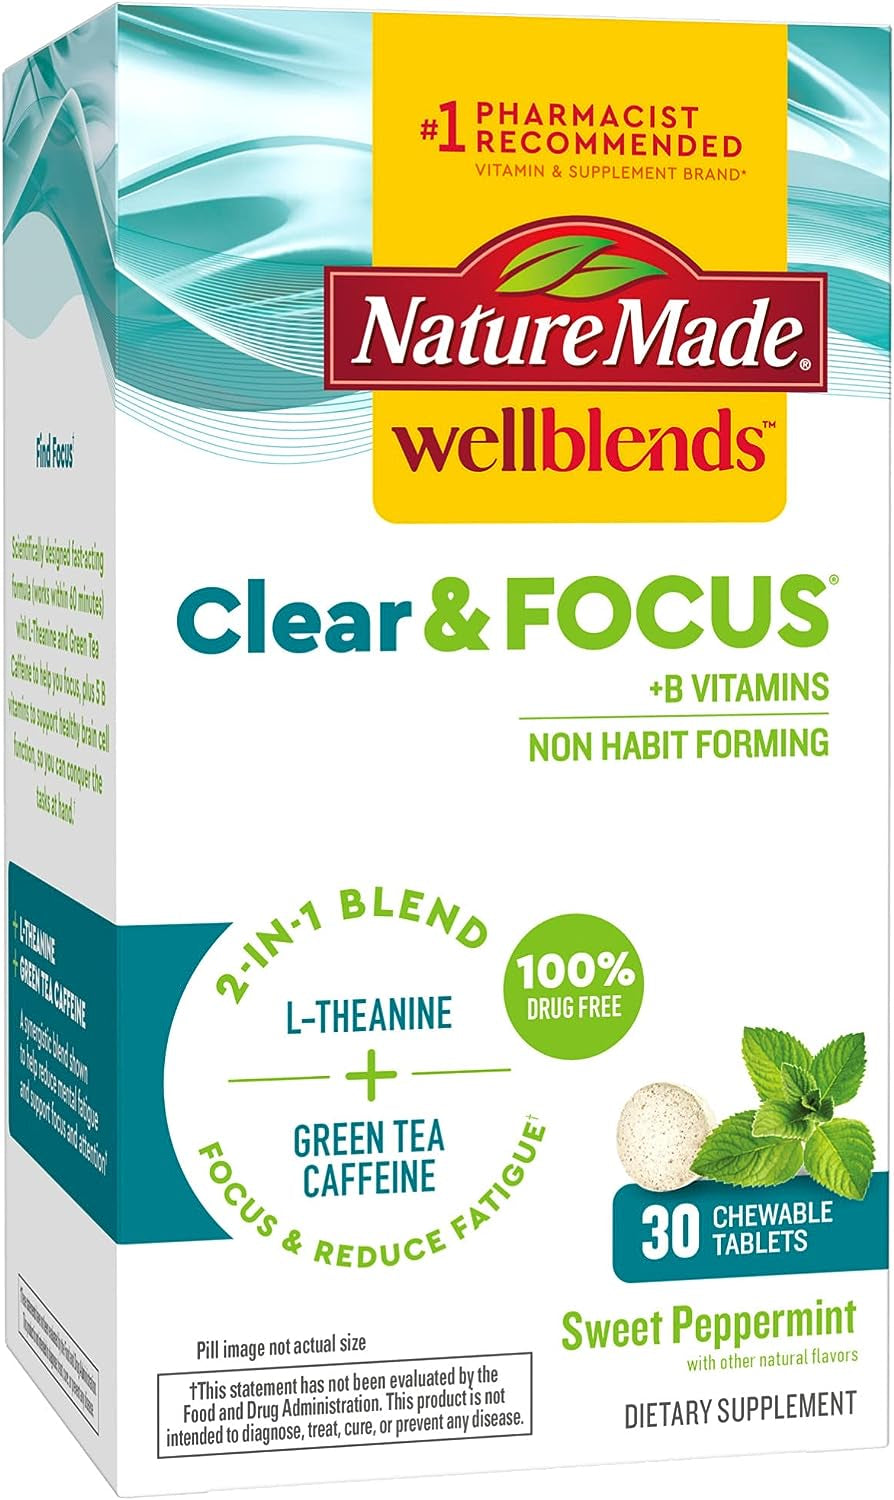 Nature Made Wellblends Clear & Focus, L-Theanine, Green Tea Caffeine, 5 B Vitamins, Fast-Acting Formula, 30 Chewable Tablets, Peppermint Flavor